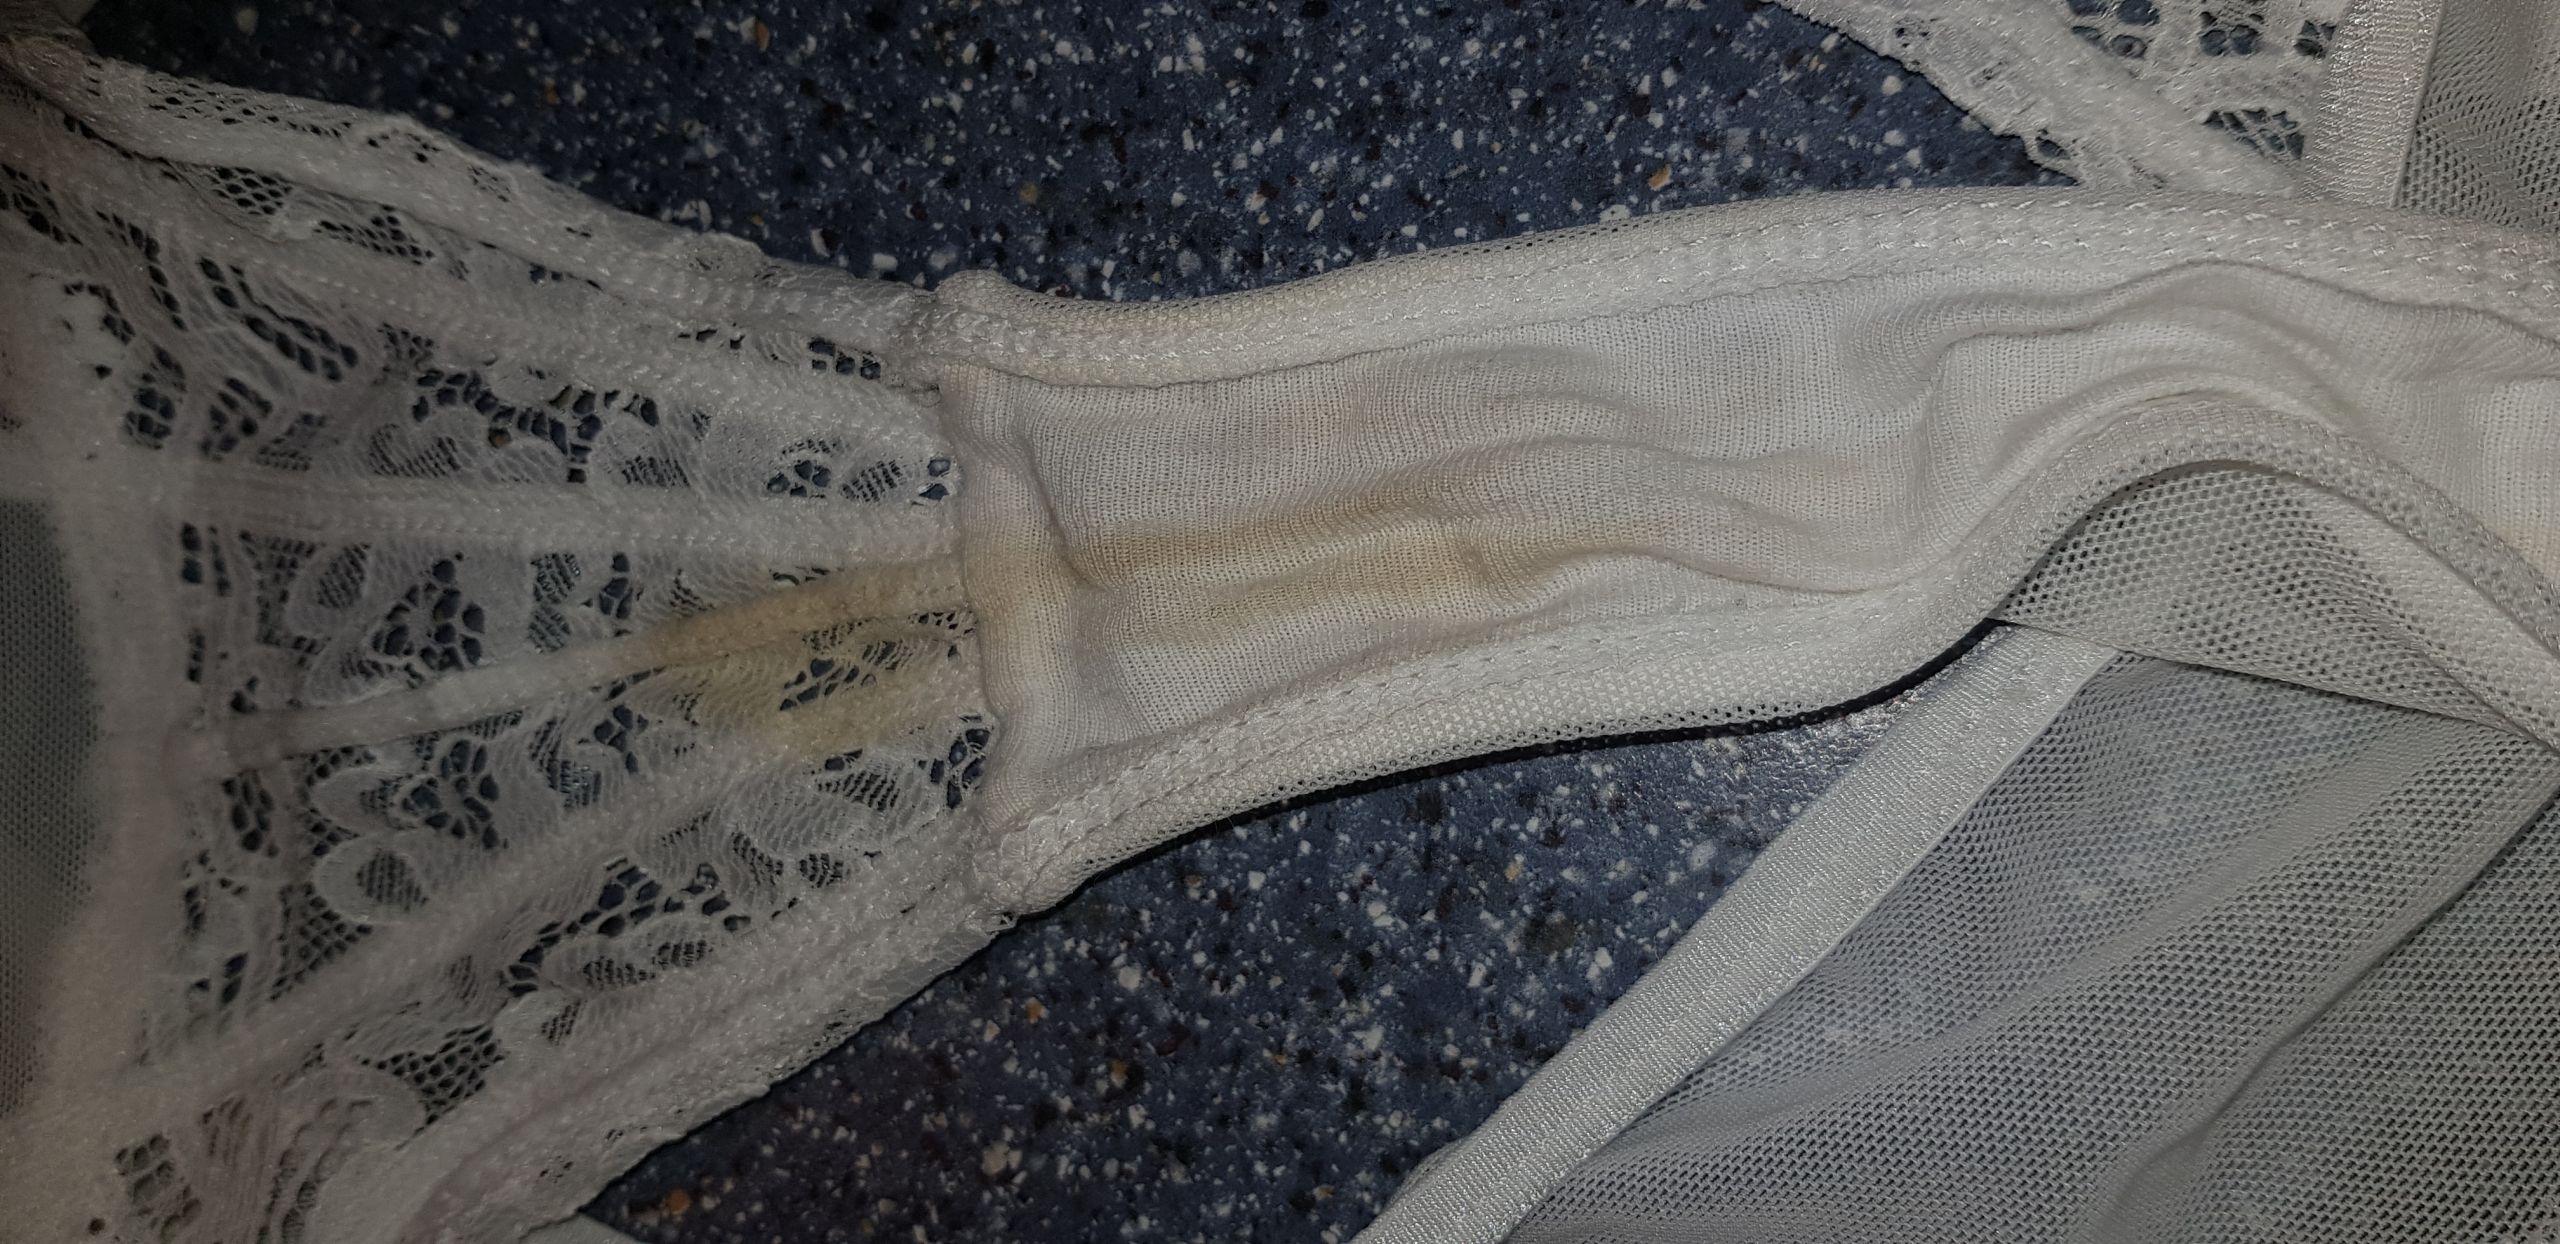 Dirty smelly panties